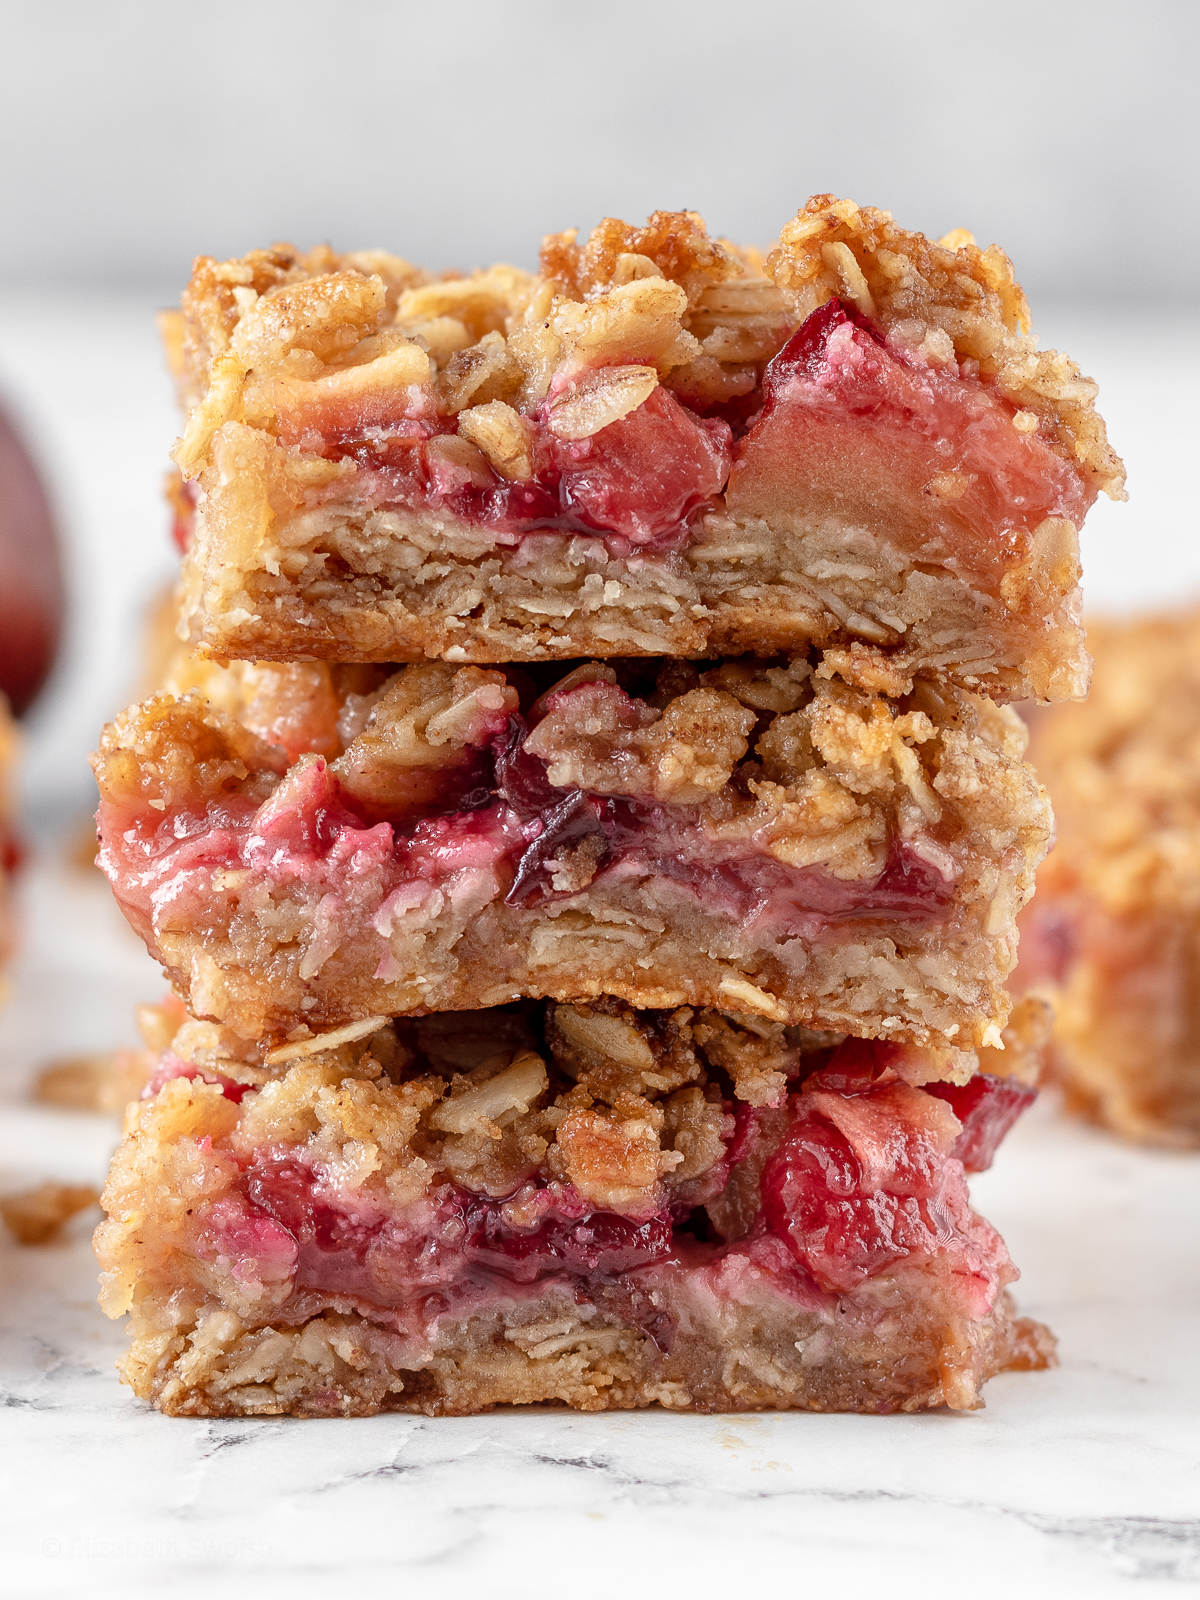 Tall stack of apple and plum crumble bars.